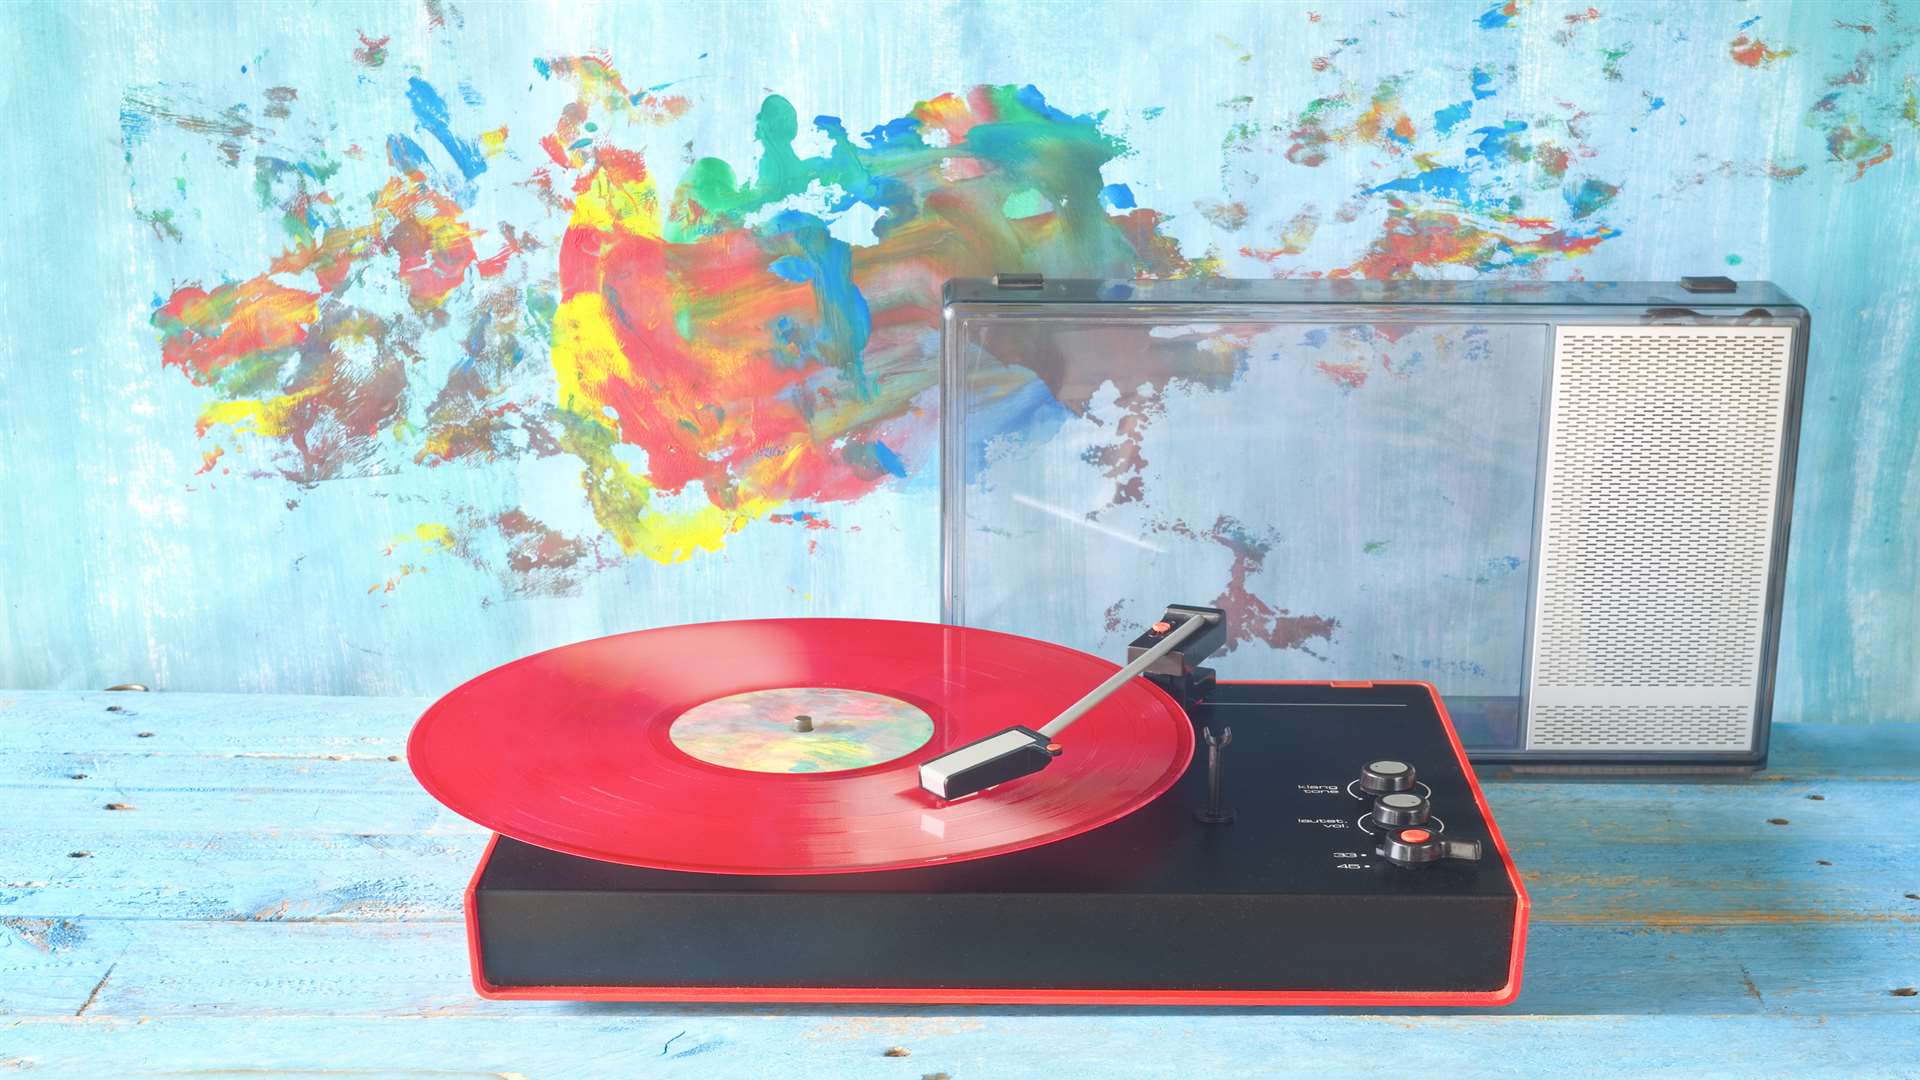 Record players are a must for listening to music that no one else has heard of